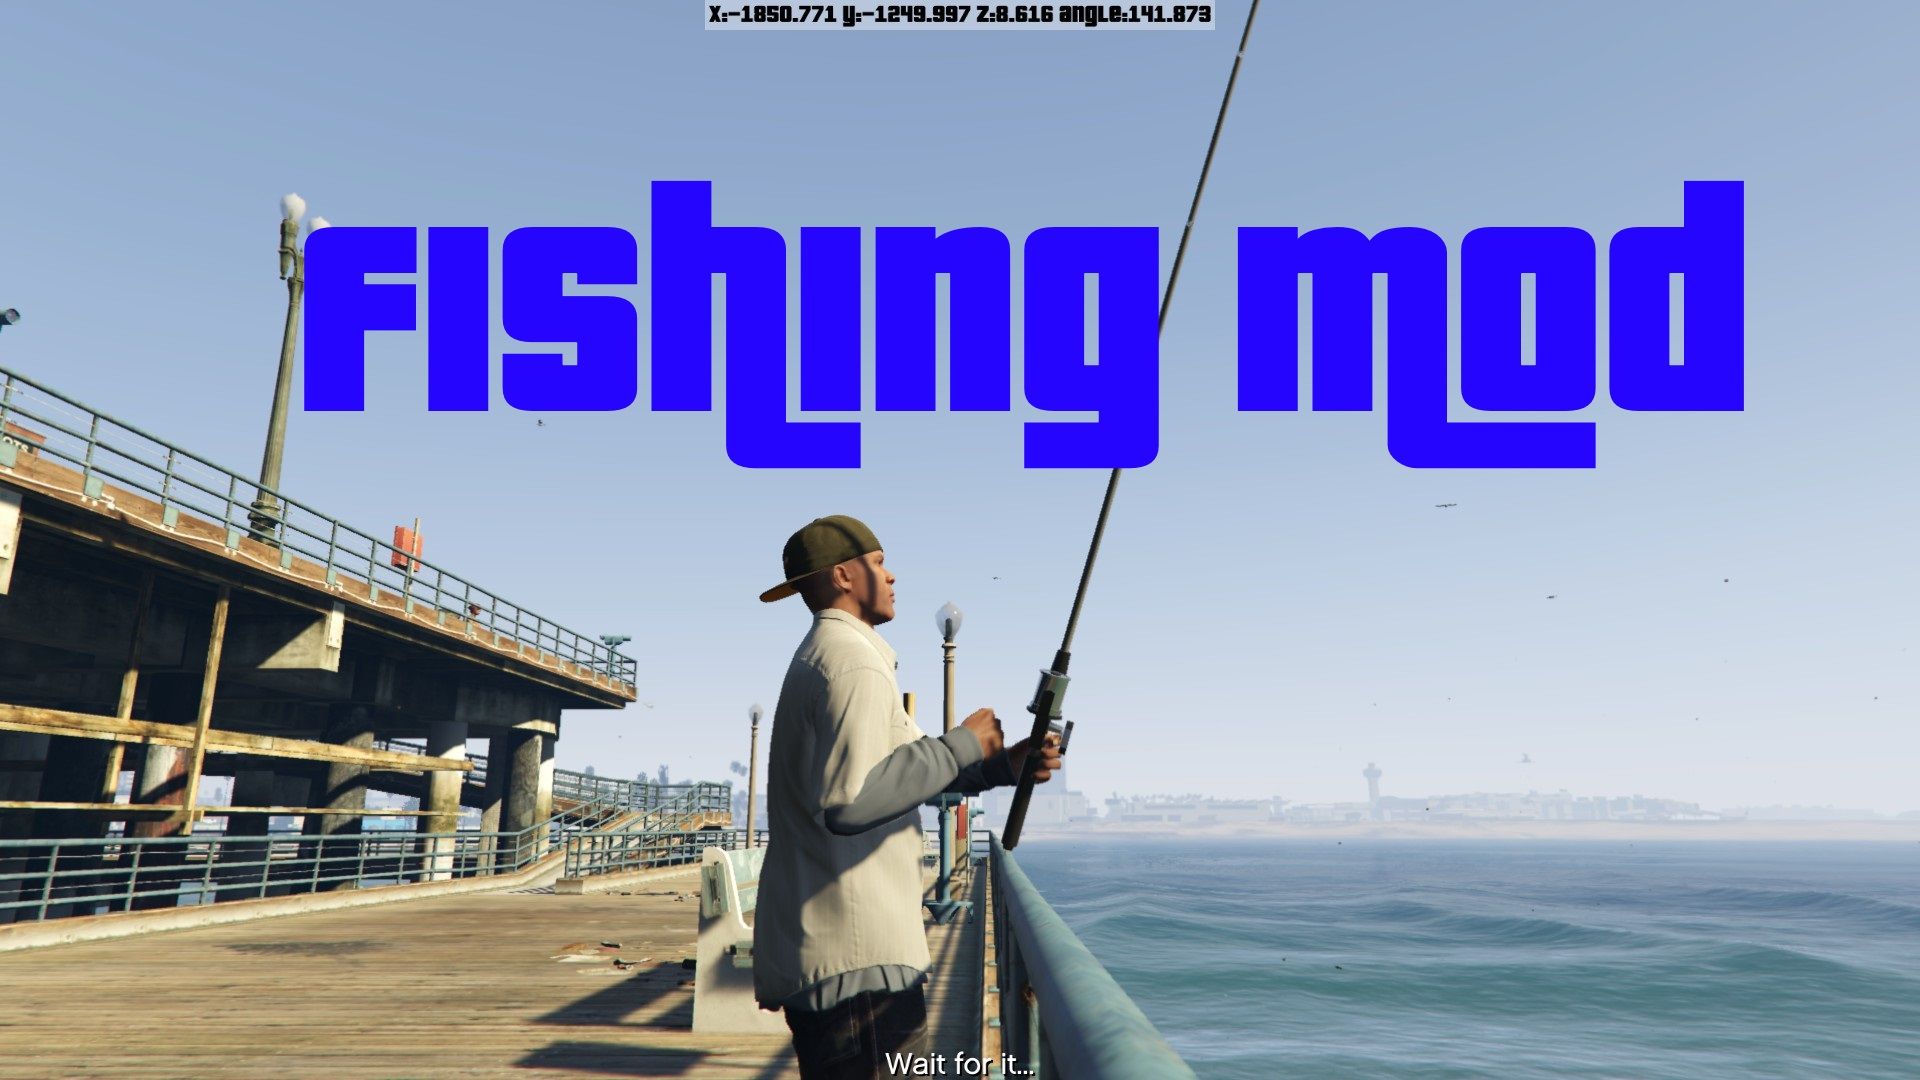 grand theft auto v fishing mod - the player with a fishing rod